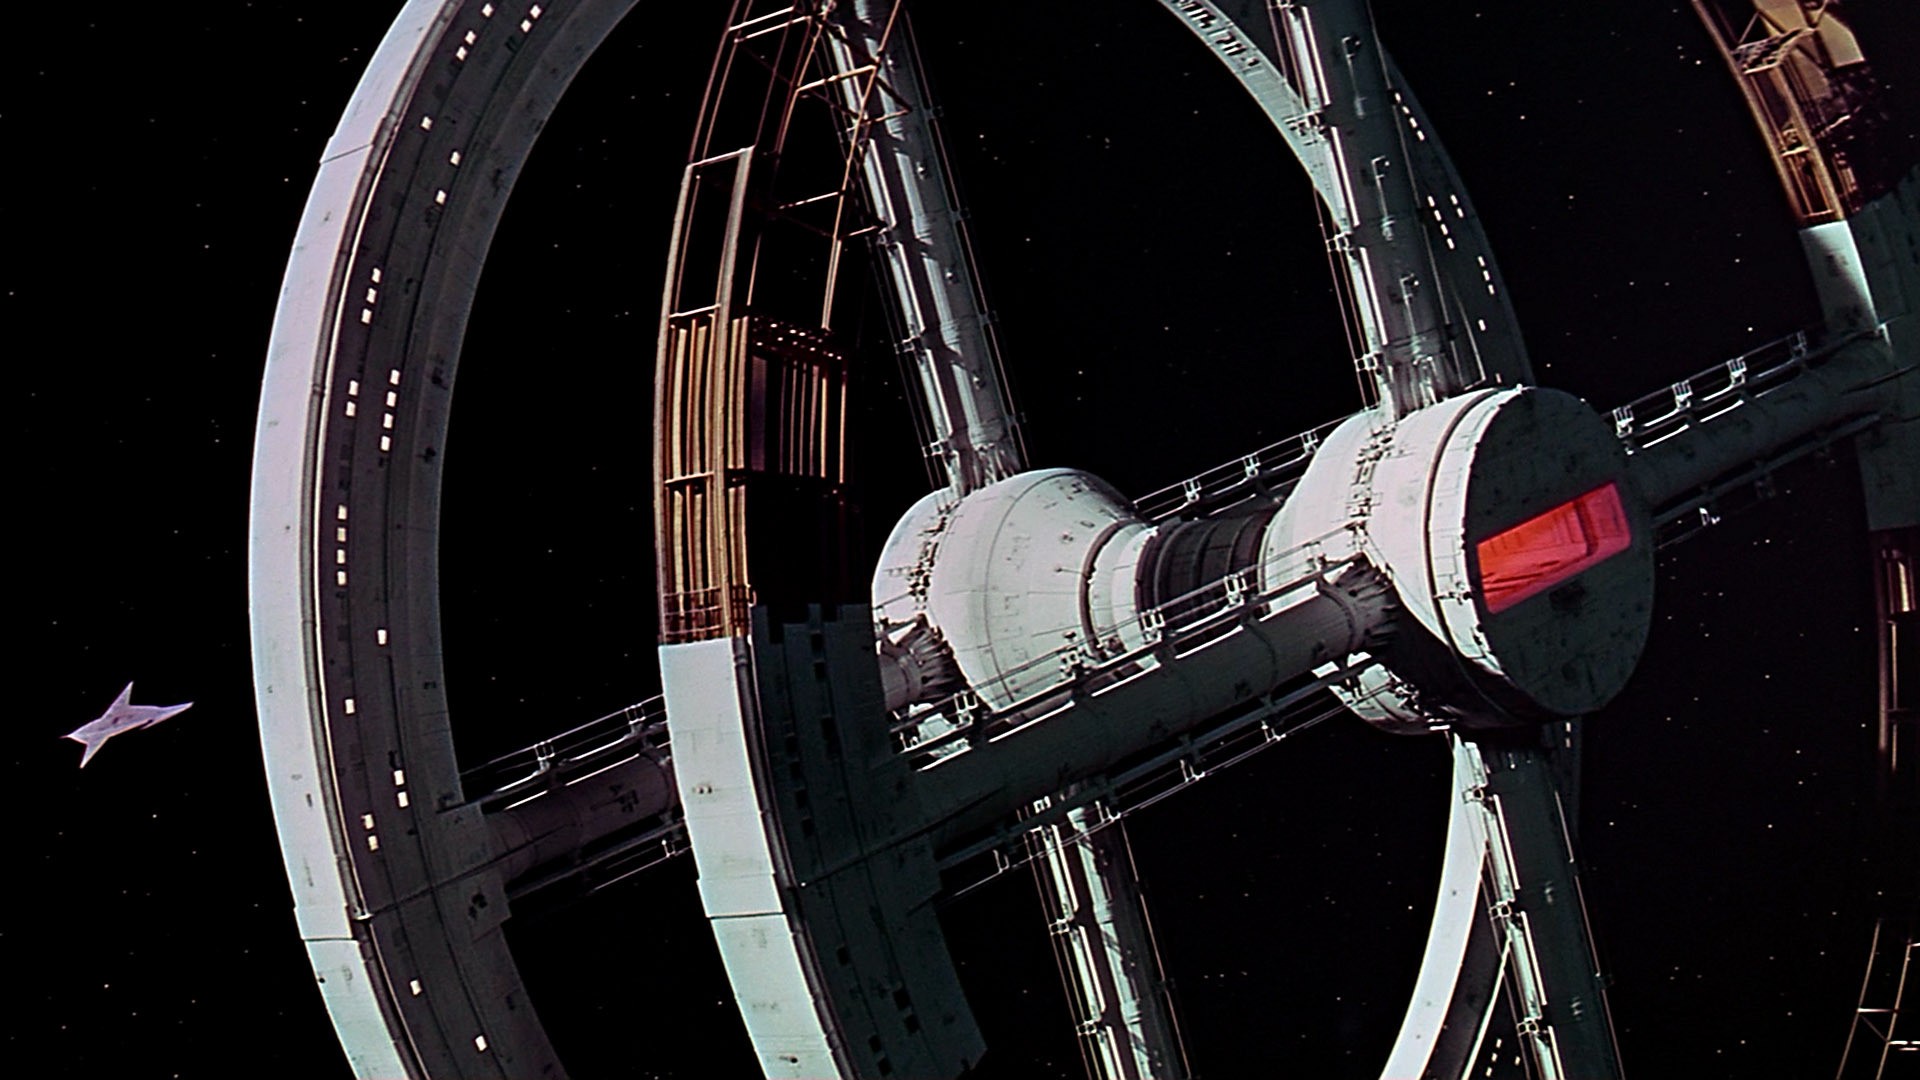 General 1920x1080 2001: A Space Odyssey movies science fiction space station